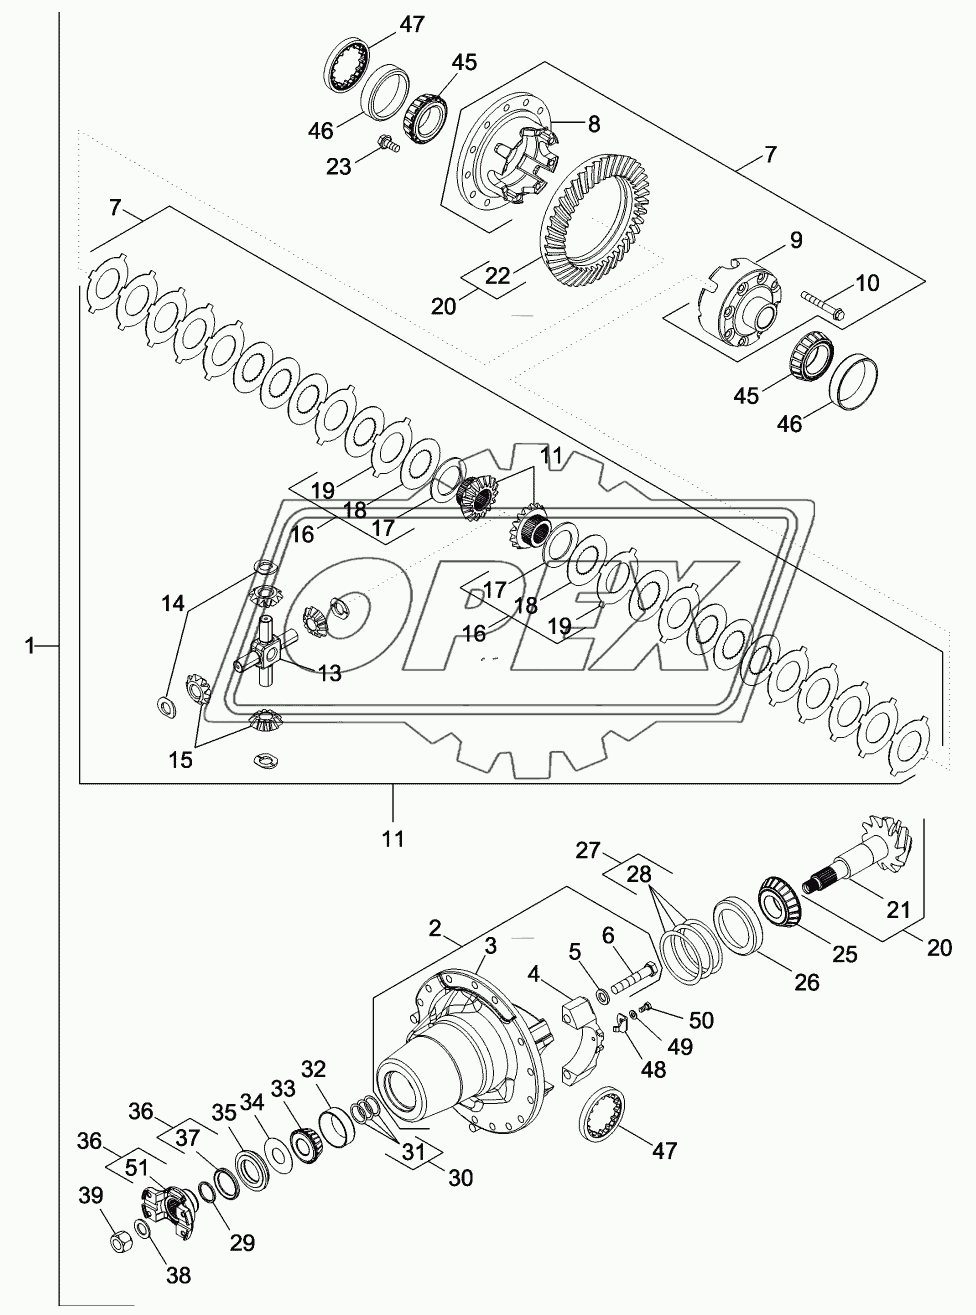 CARRIER AND DIFFERENTIAL - MFD, 10 BOLT HUB, WITHOUT DIFFERENTIAL LOCK